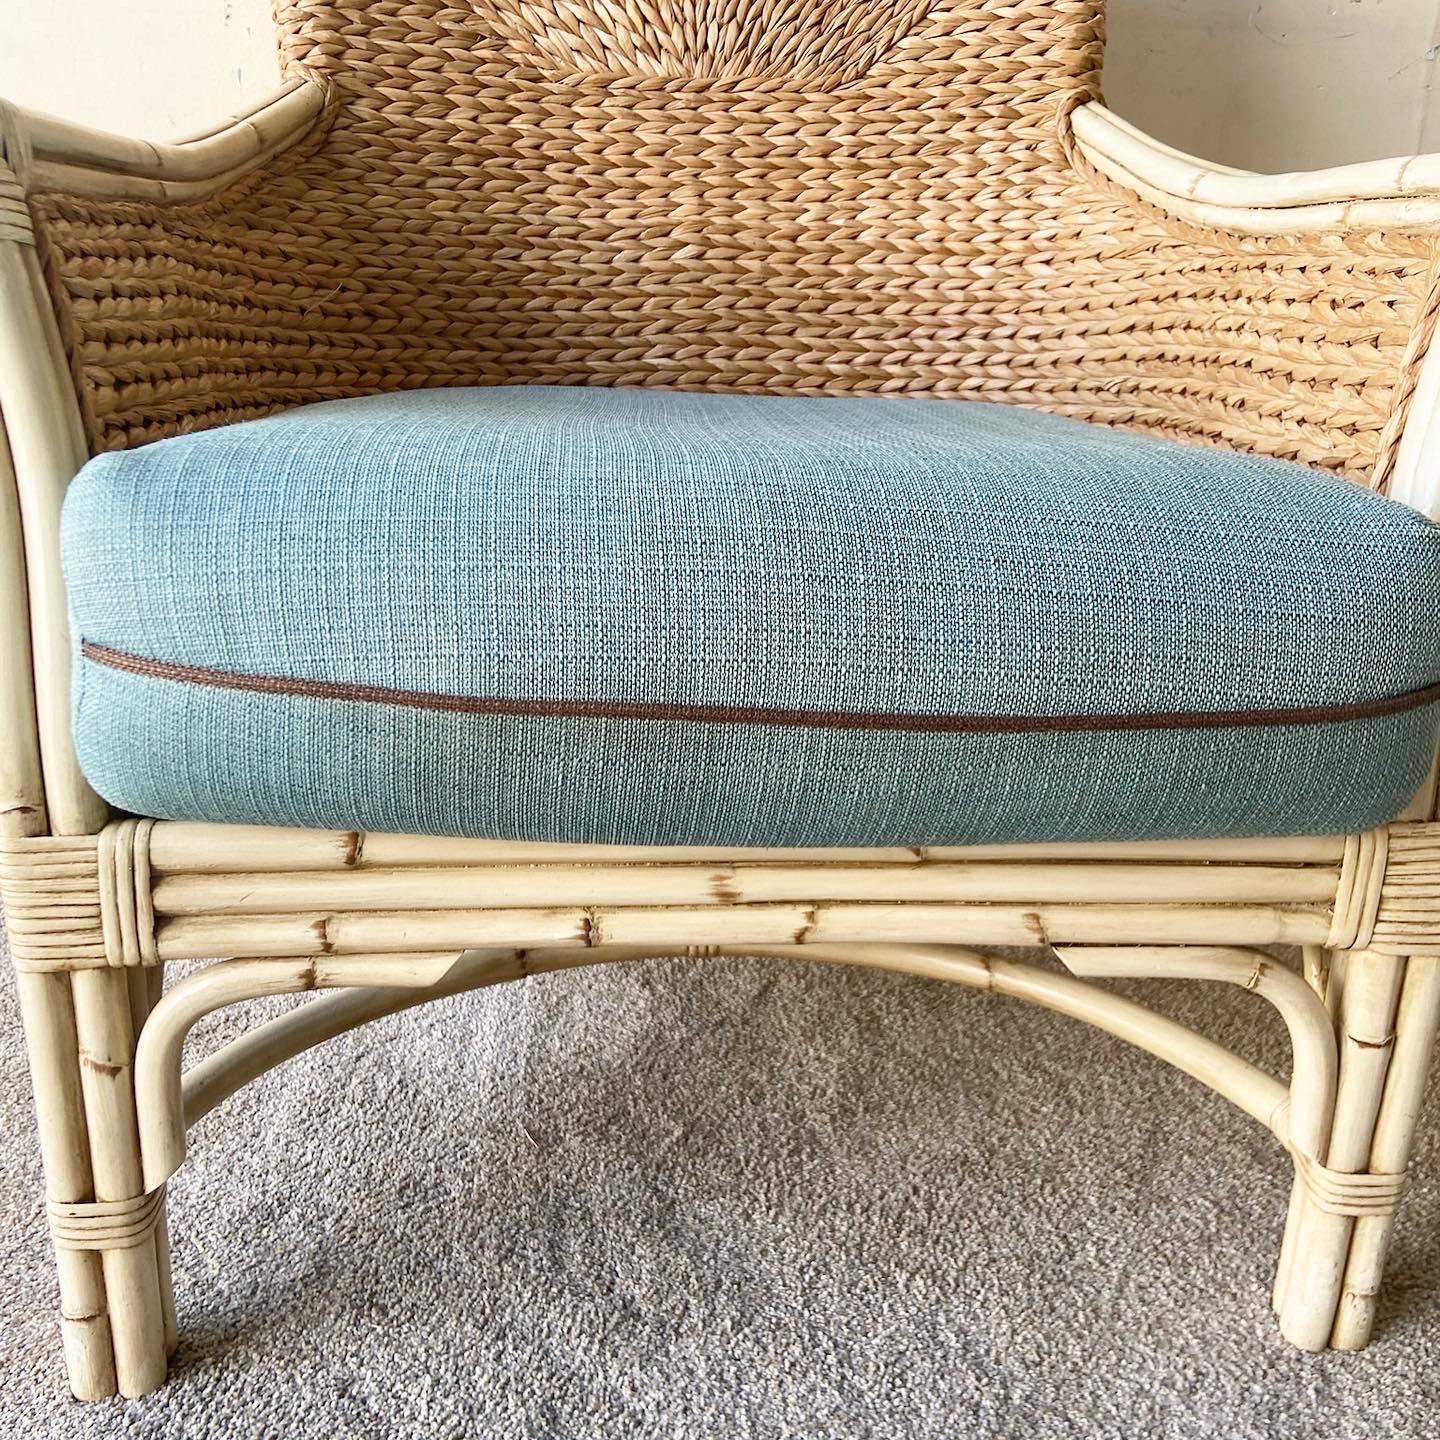 Late 20th Century Boho Chic Bamboo Rattan and Seagrass Lounge Chair with Ottoman For Sale